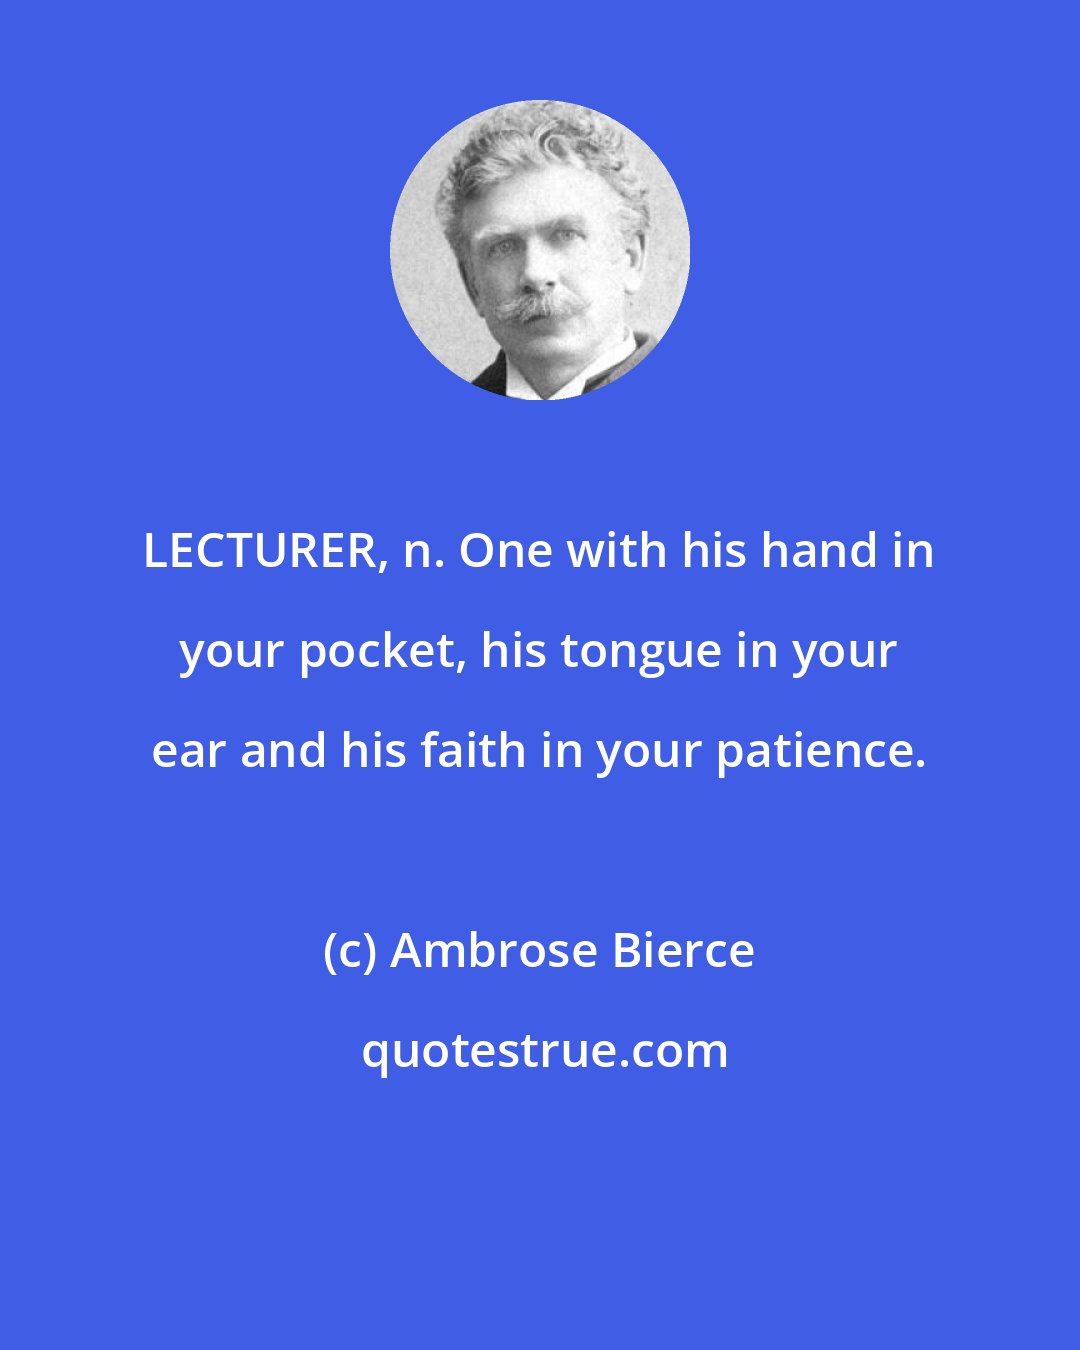 Ambrose Bierce: LECTURER, n. One with his hand in your pocket, his tongue in your ear and his faith in your patience.